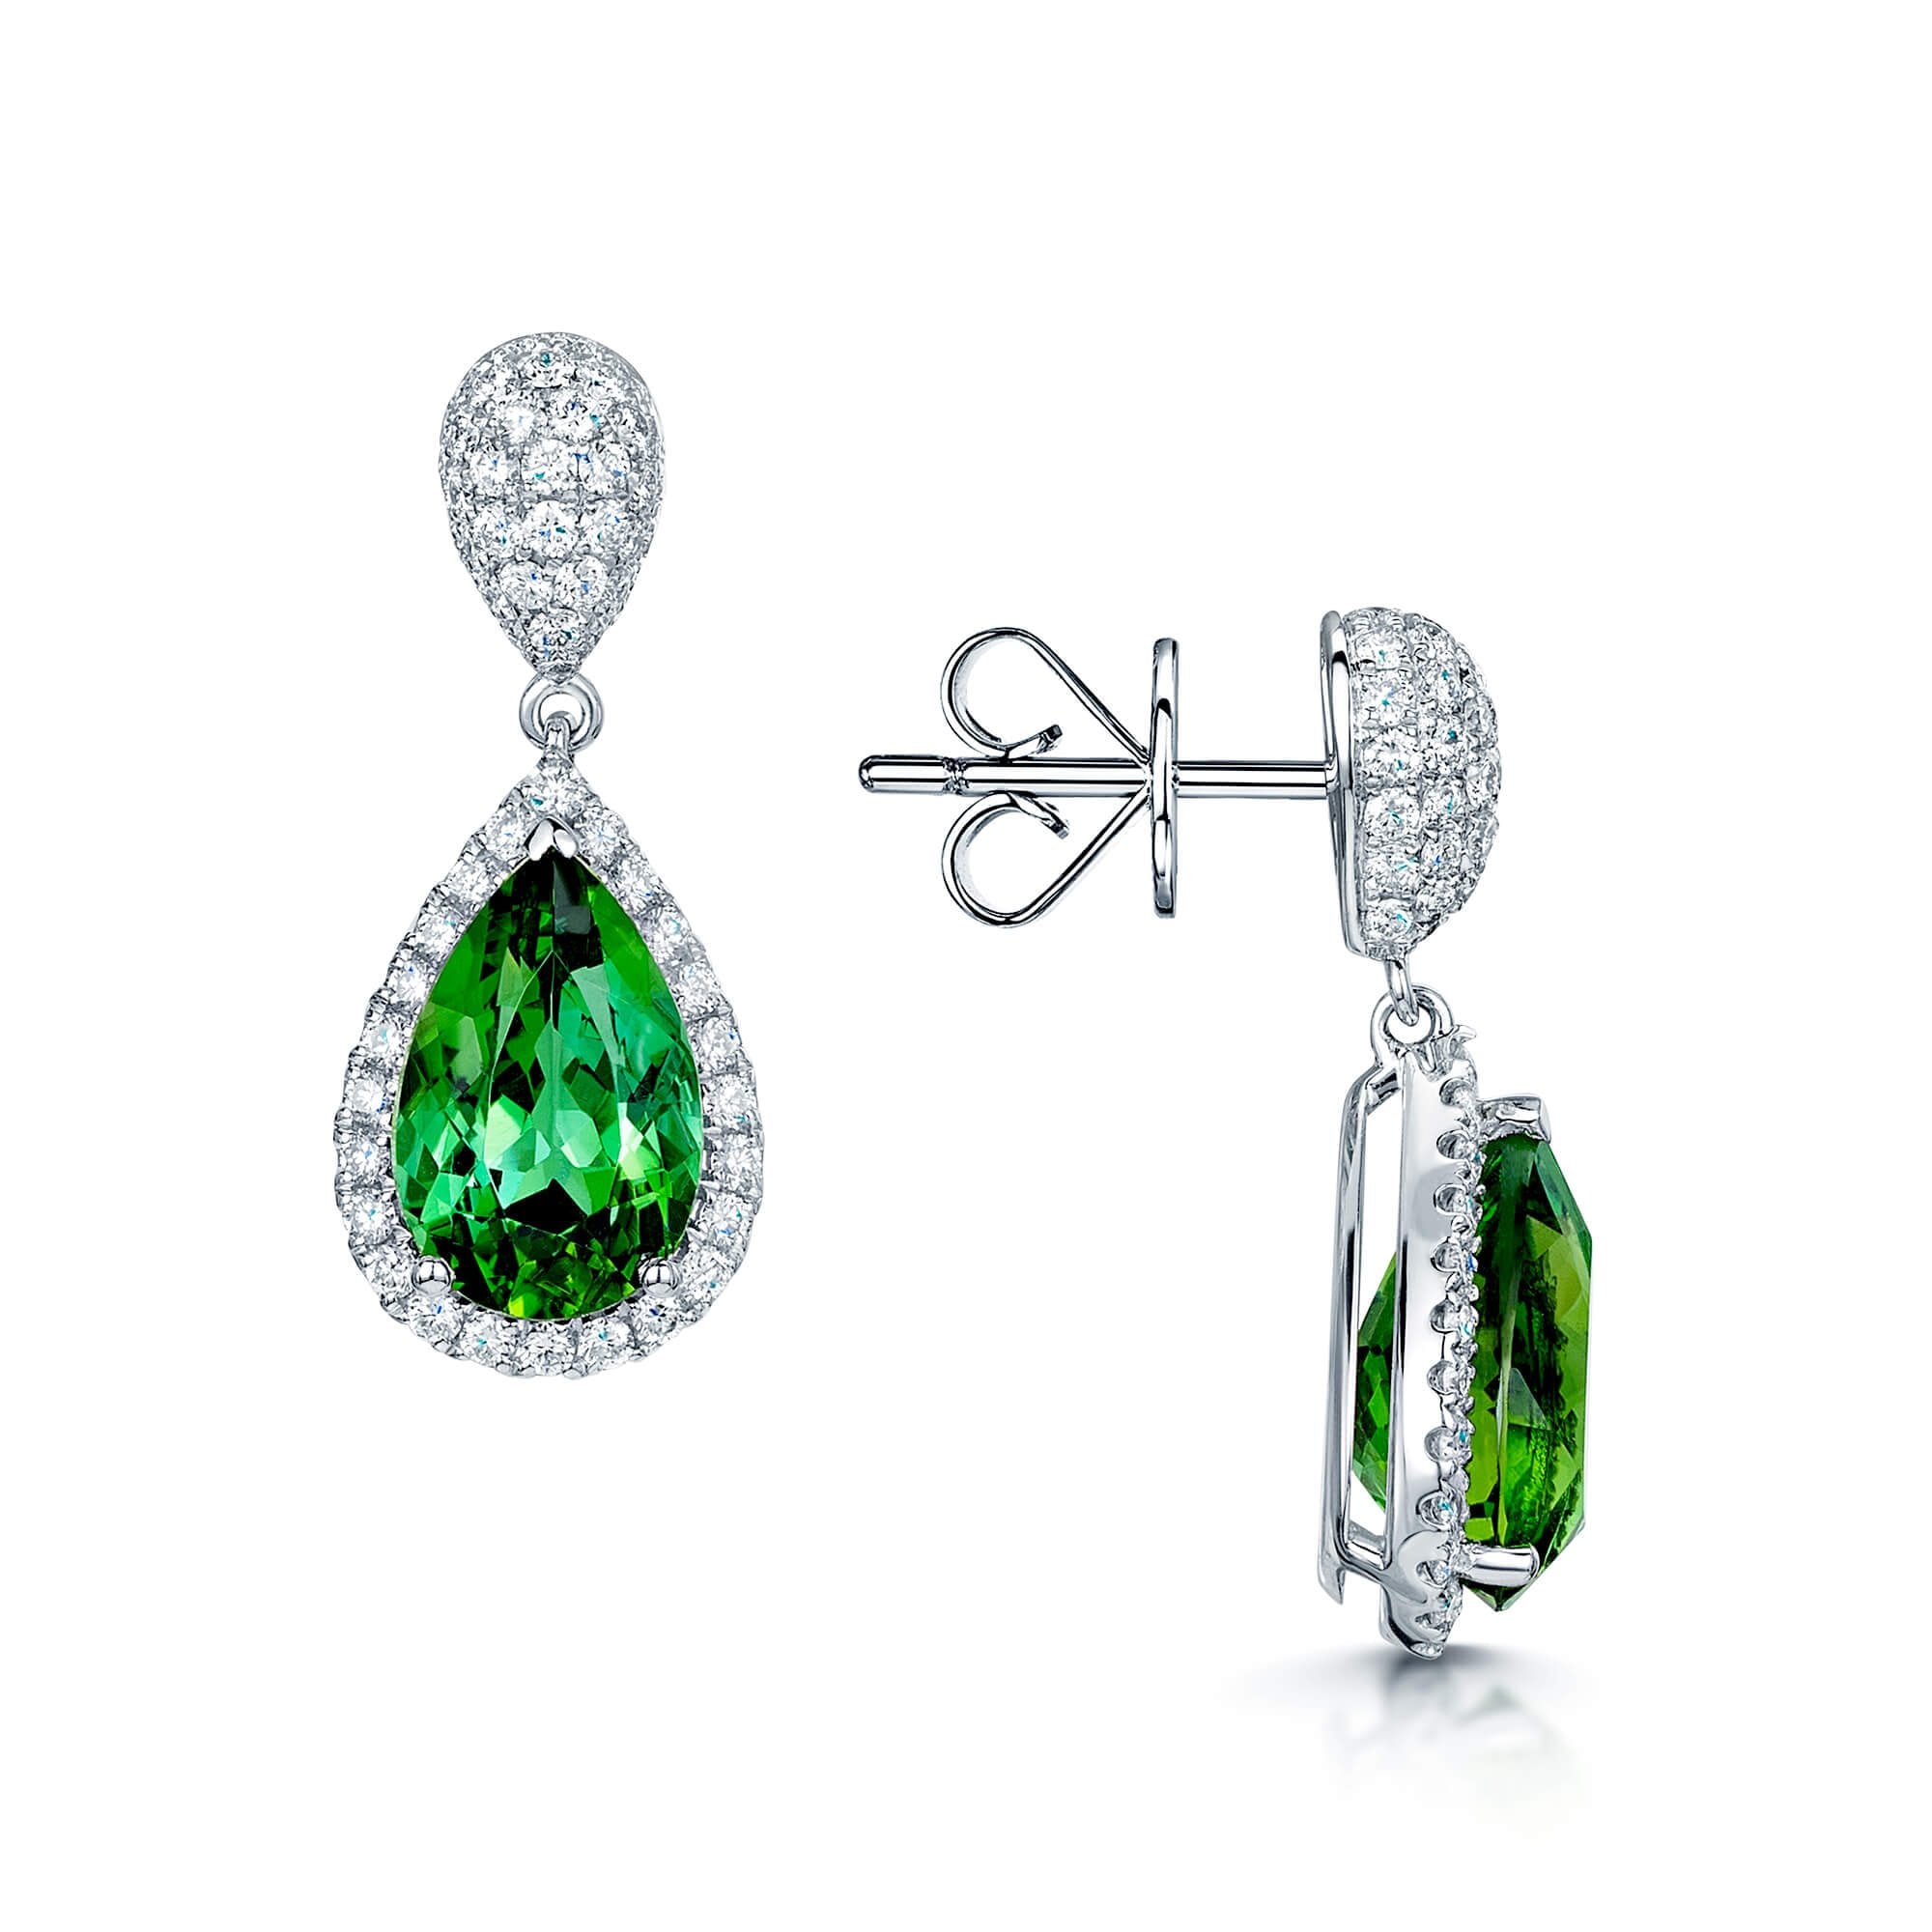 18ct White Gold Pear Green Tourmaline And Diamond Halo Drop Earrings With A Pave Pear shaped Stud